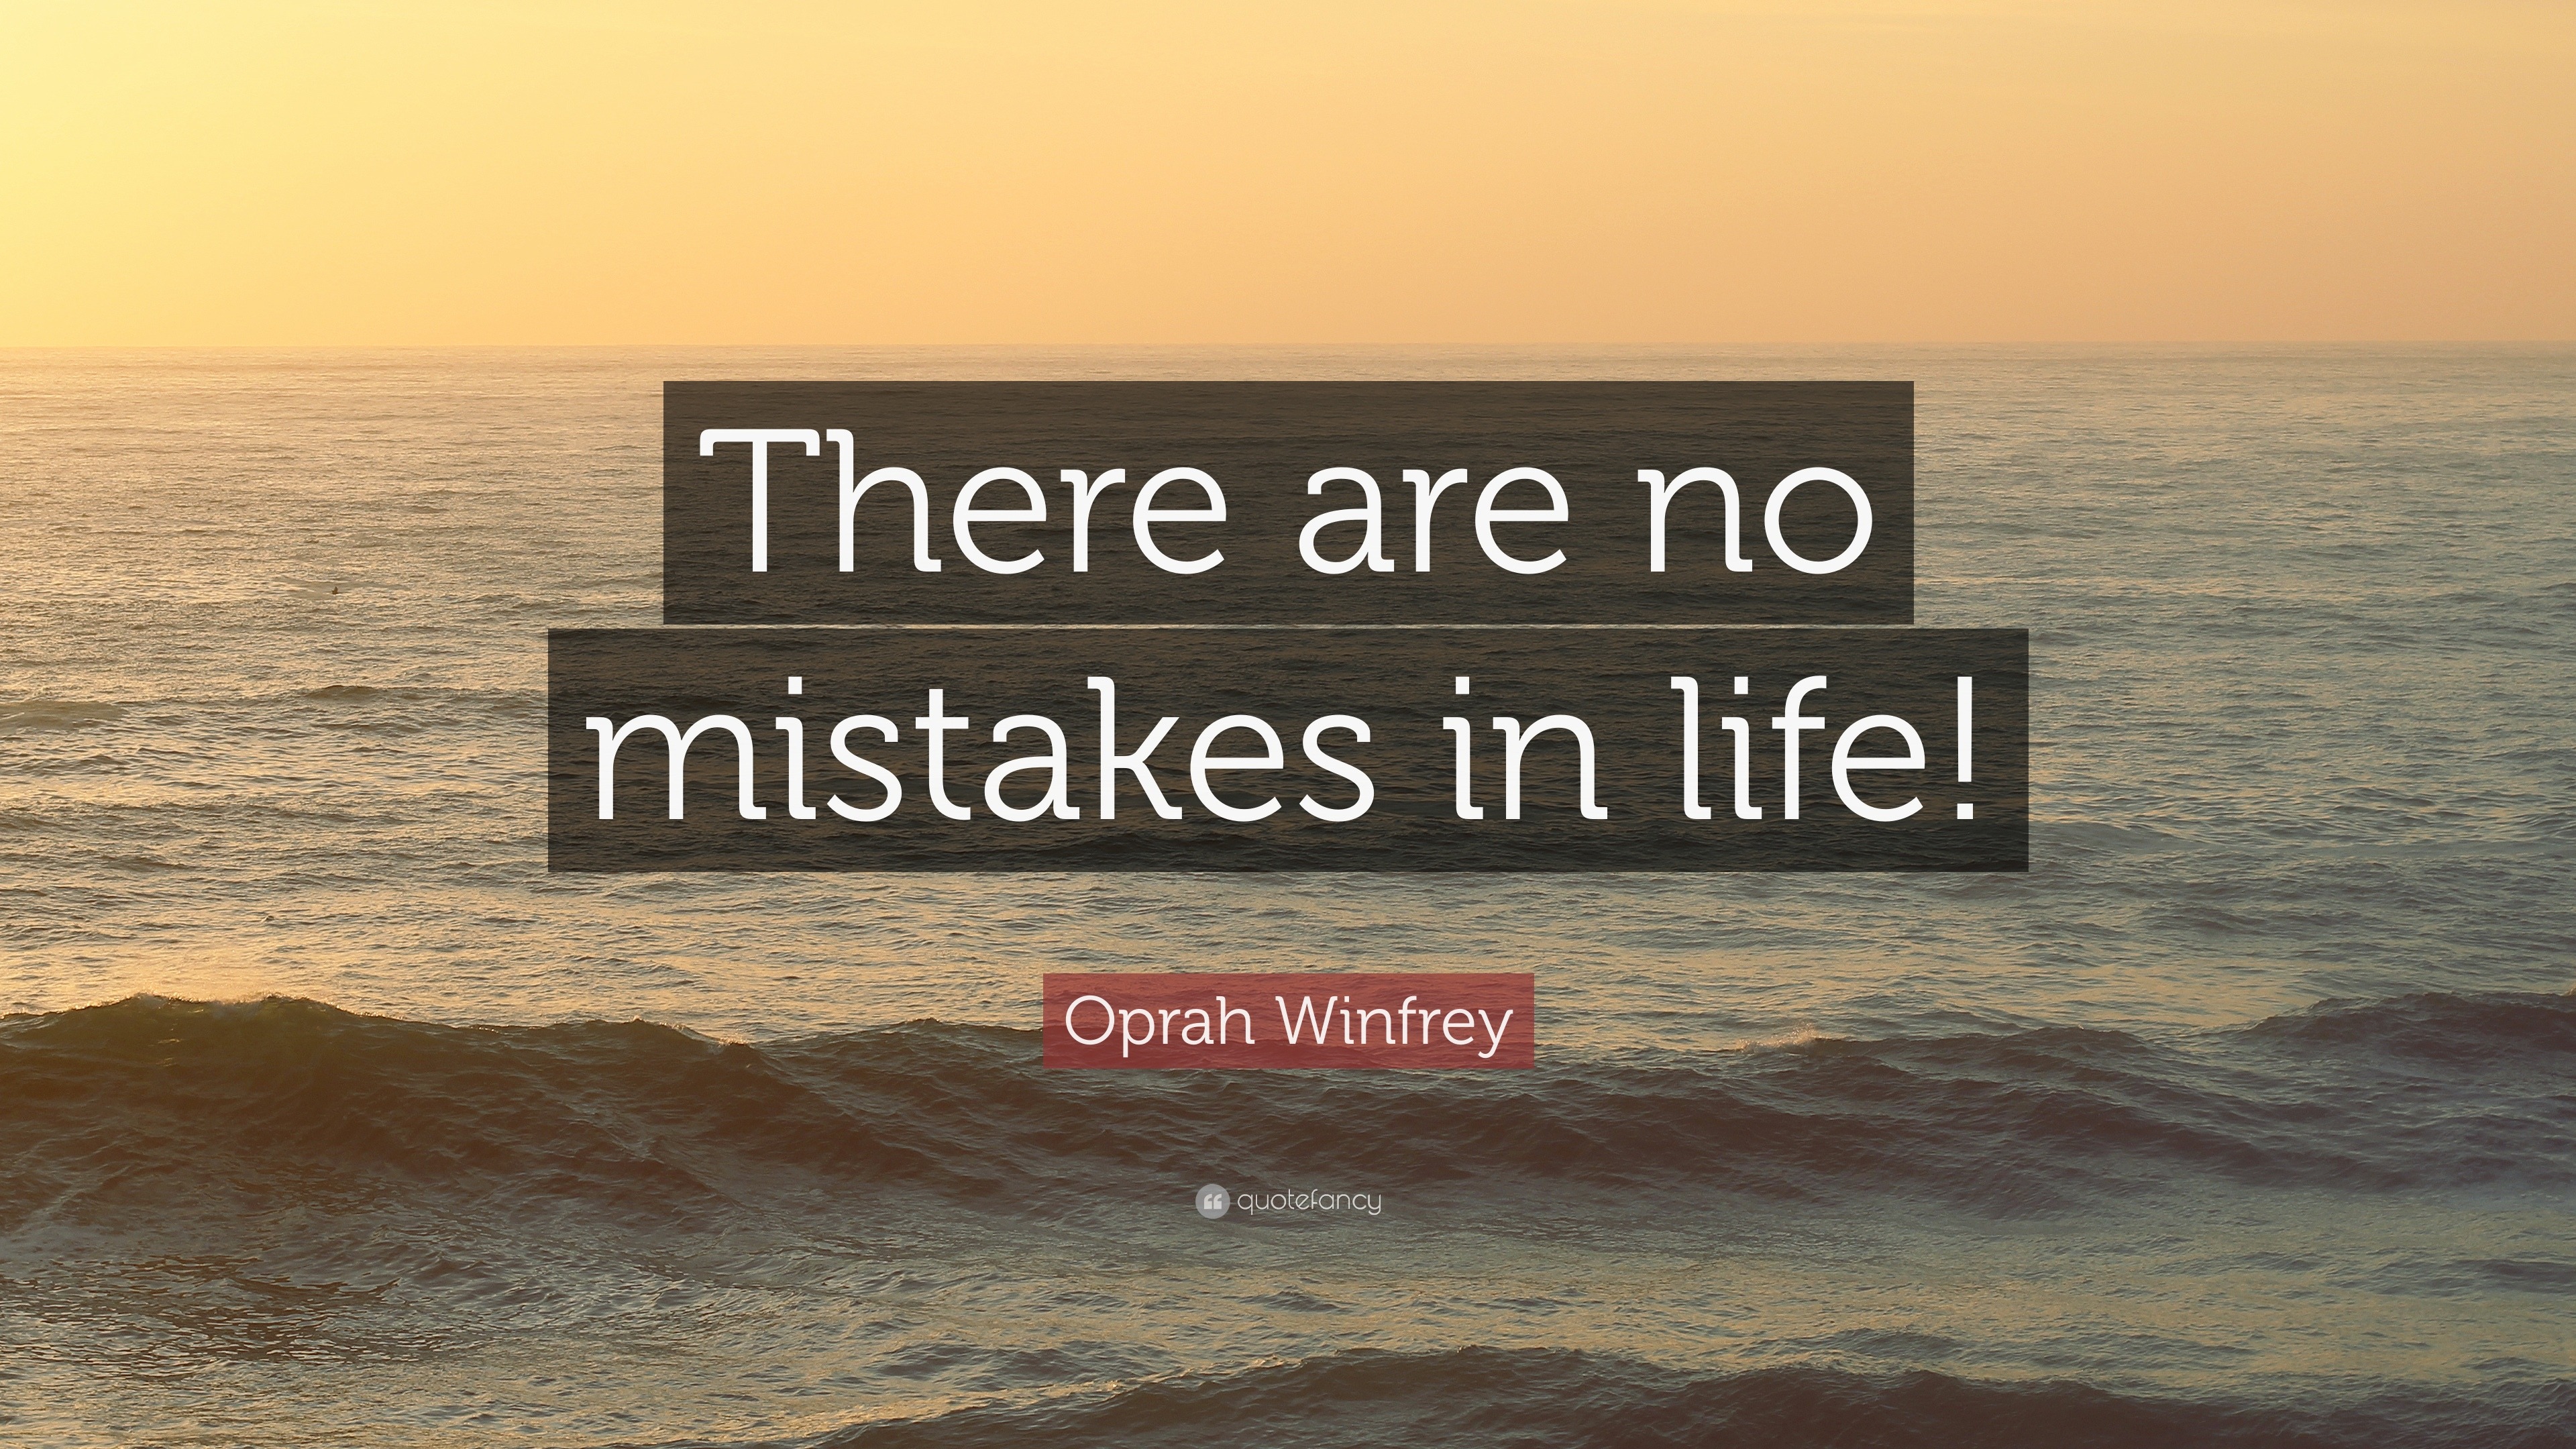 Oprah Winfrey Quote  There are no mistakes  in life  